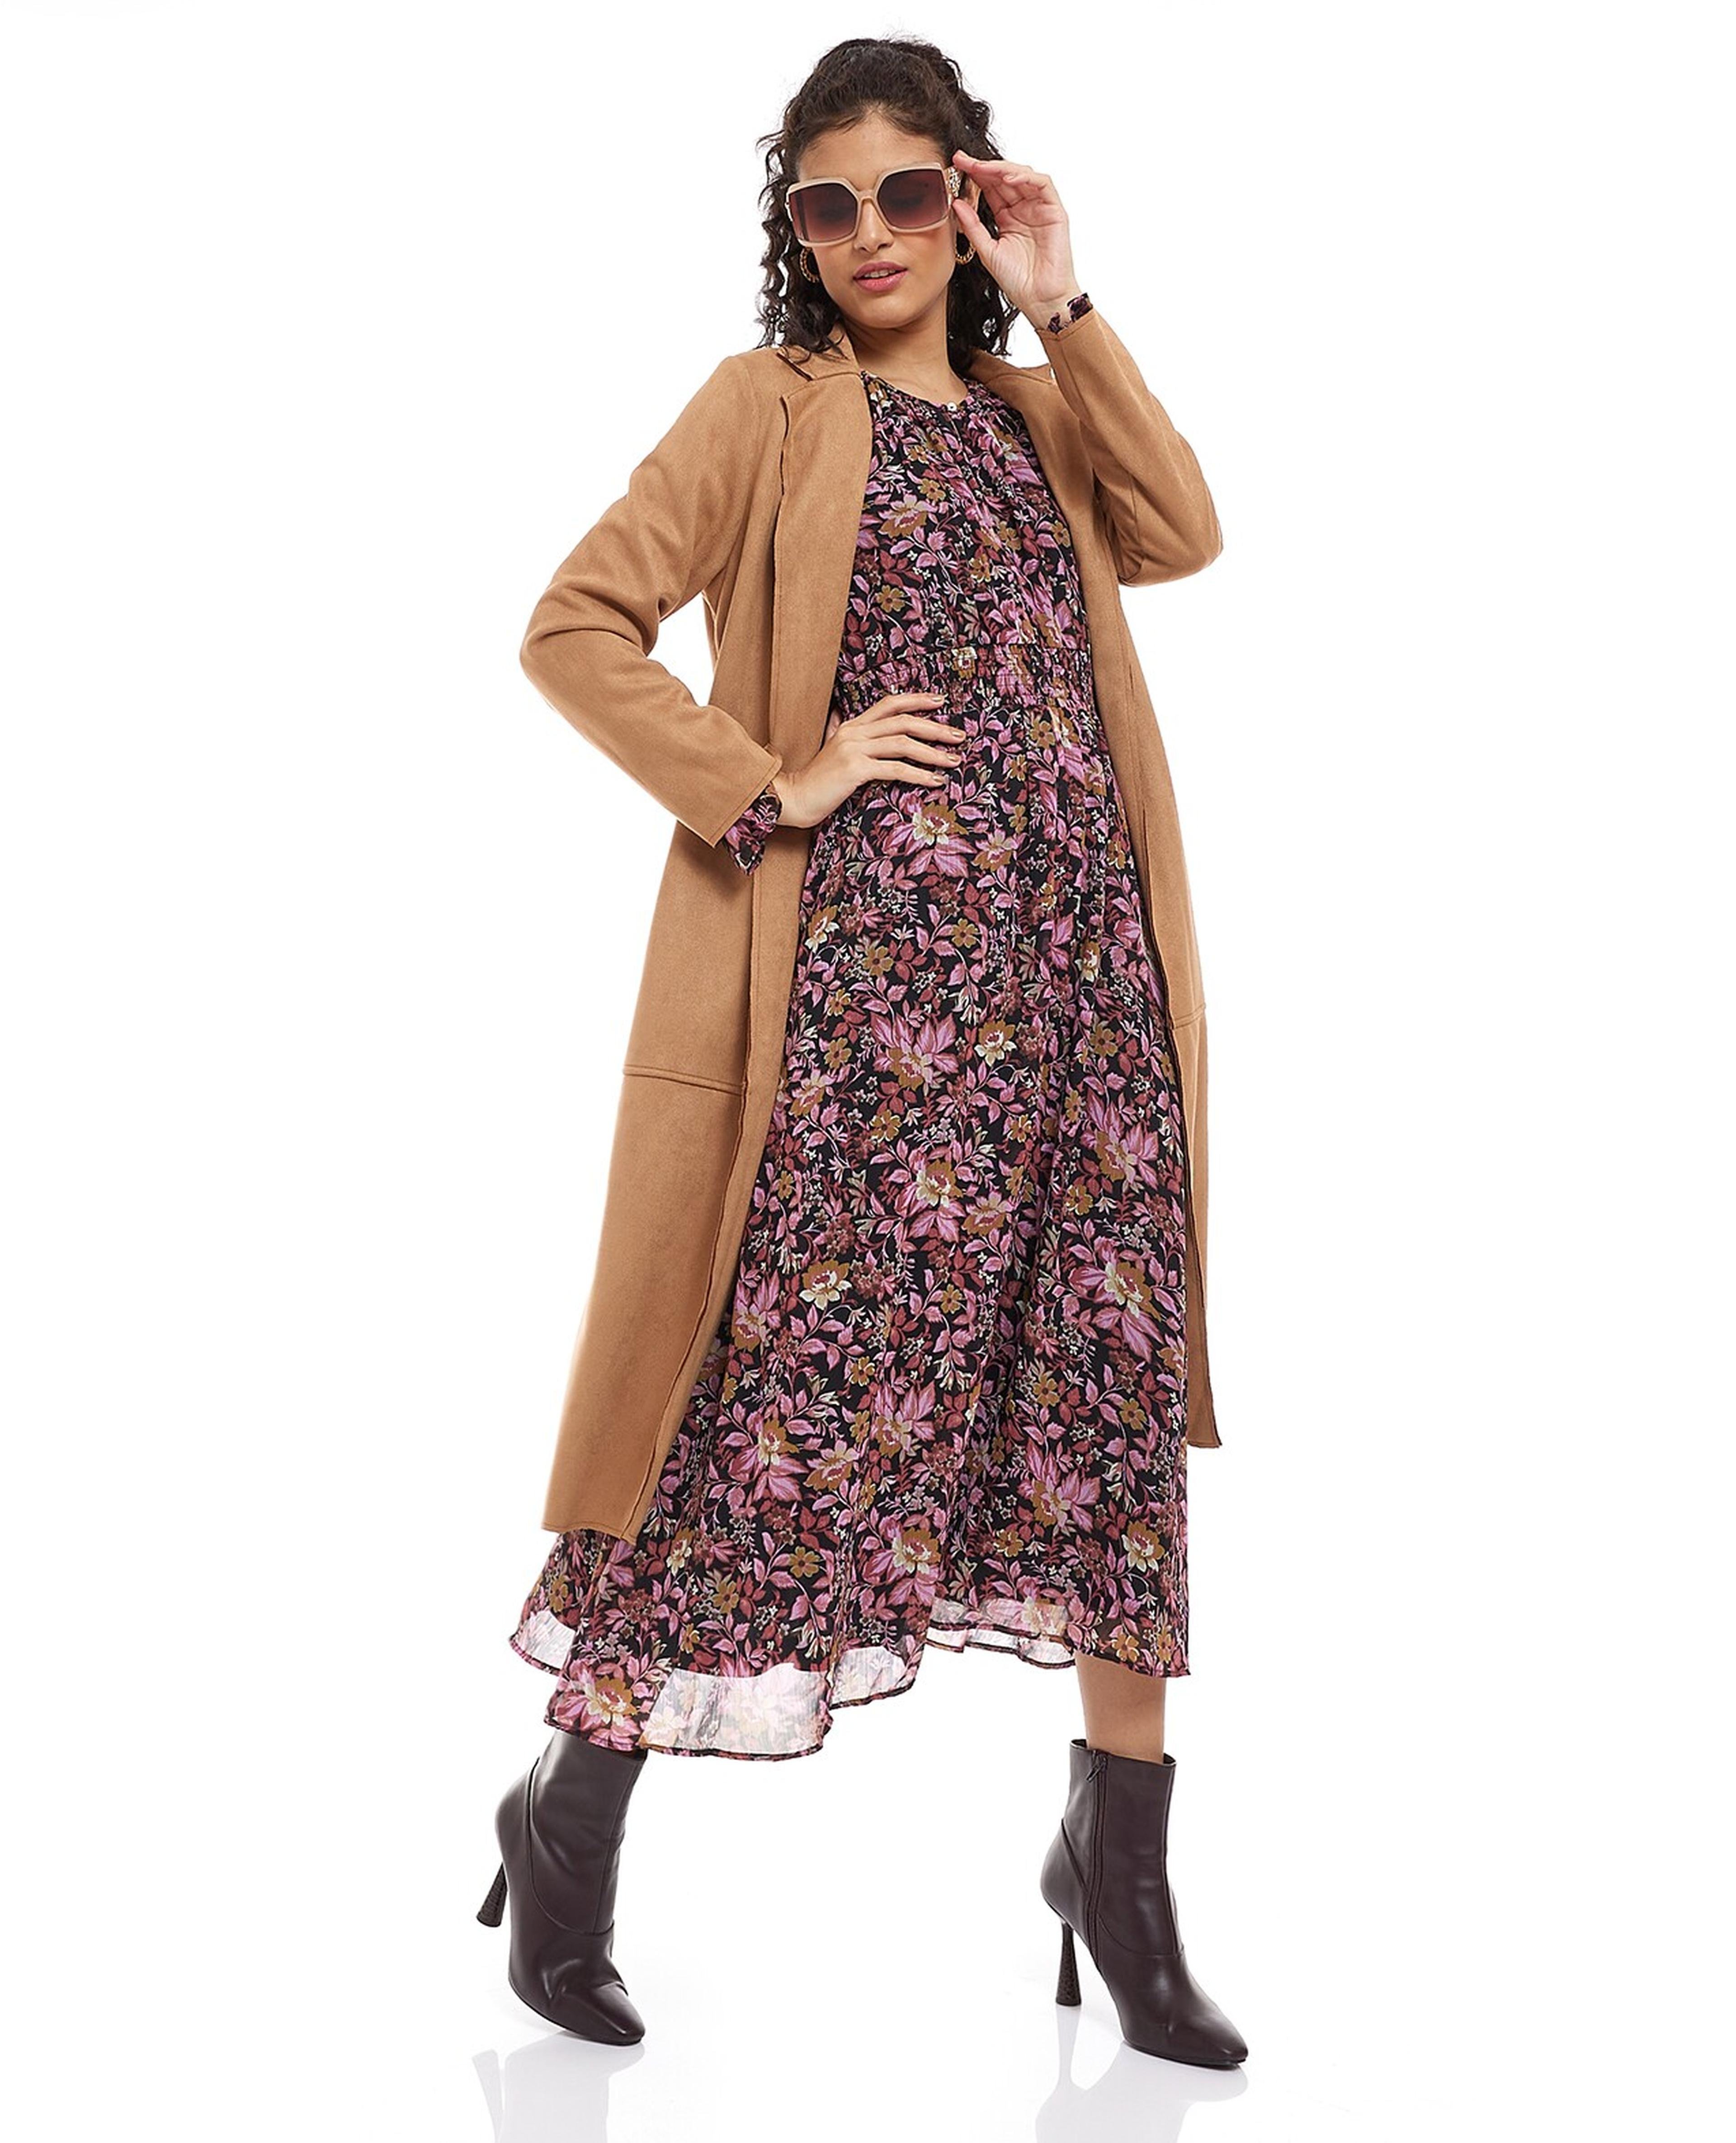 Floral Print Midi Dress with Crew Neck and Long Sleeves